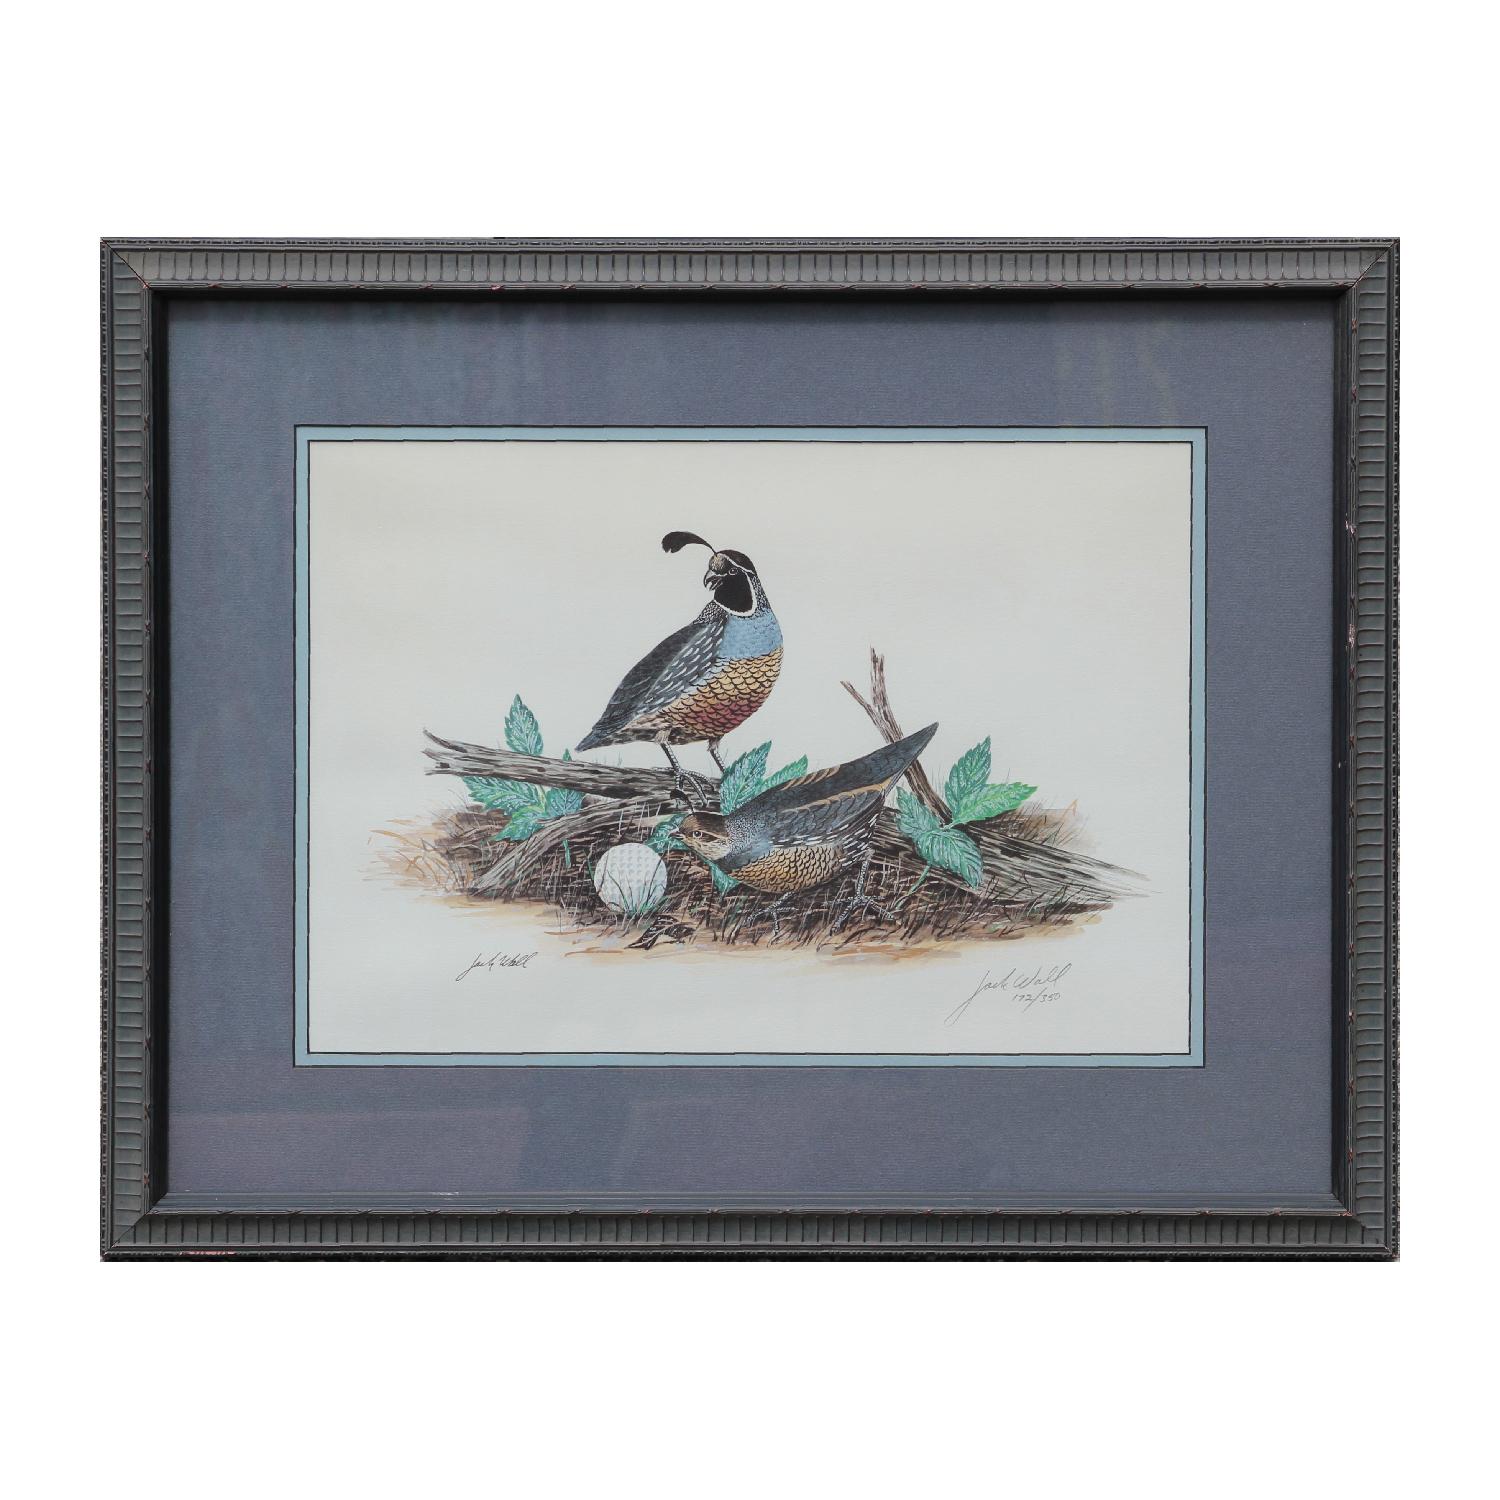 Jack Wall Figurative Print - Naturalistic Quails with Golf Ball Lithograph 172 of 350